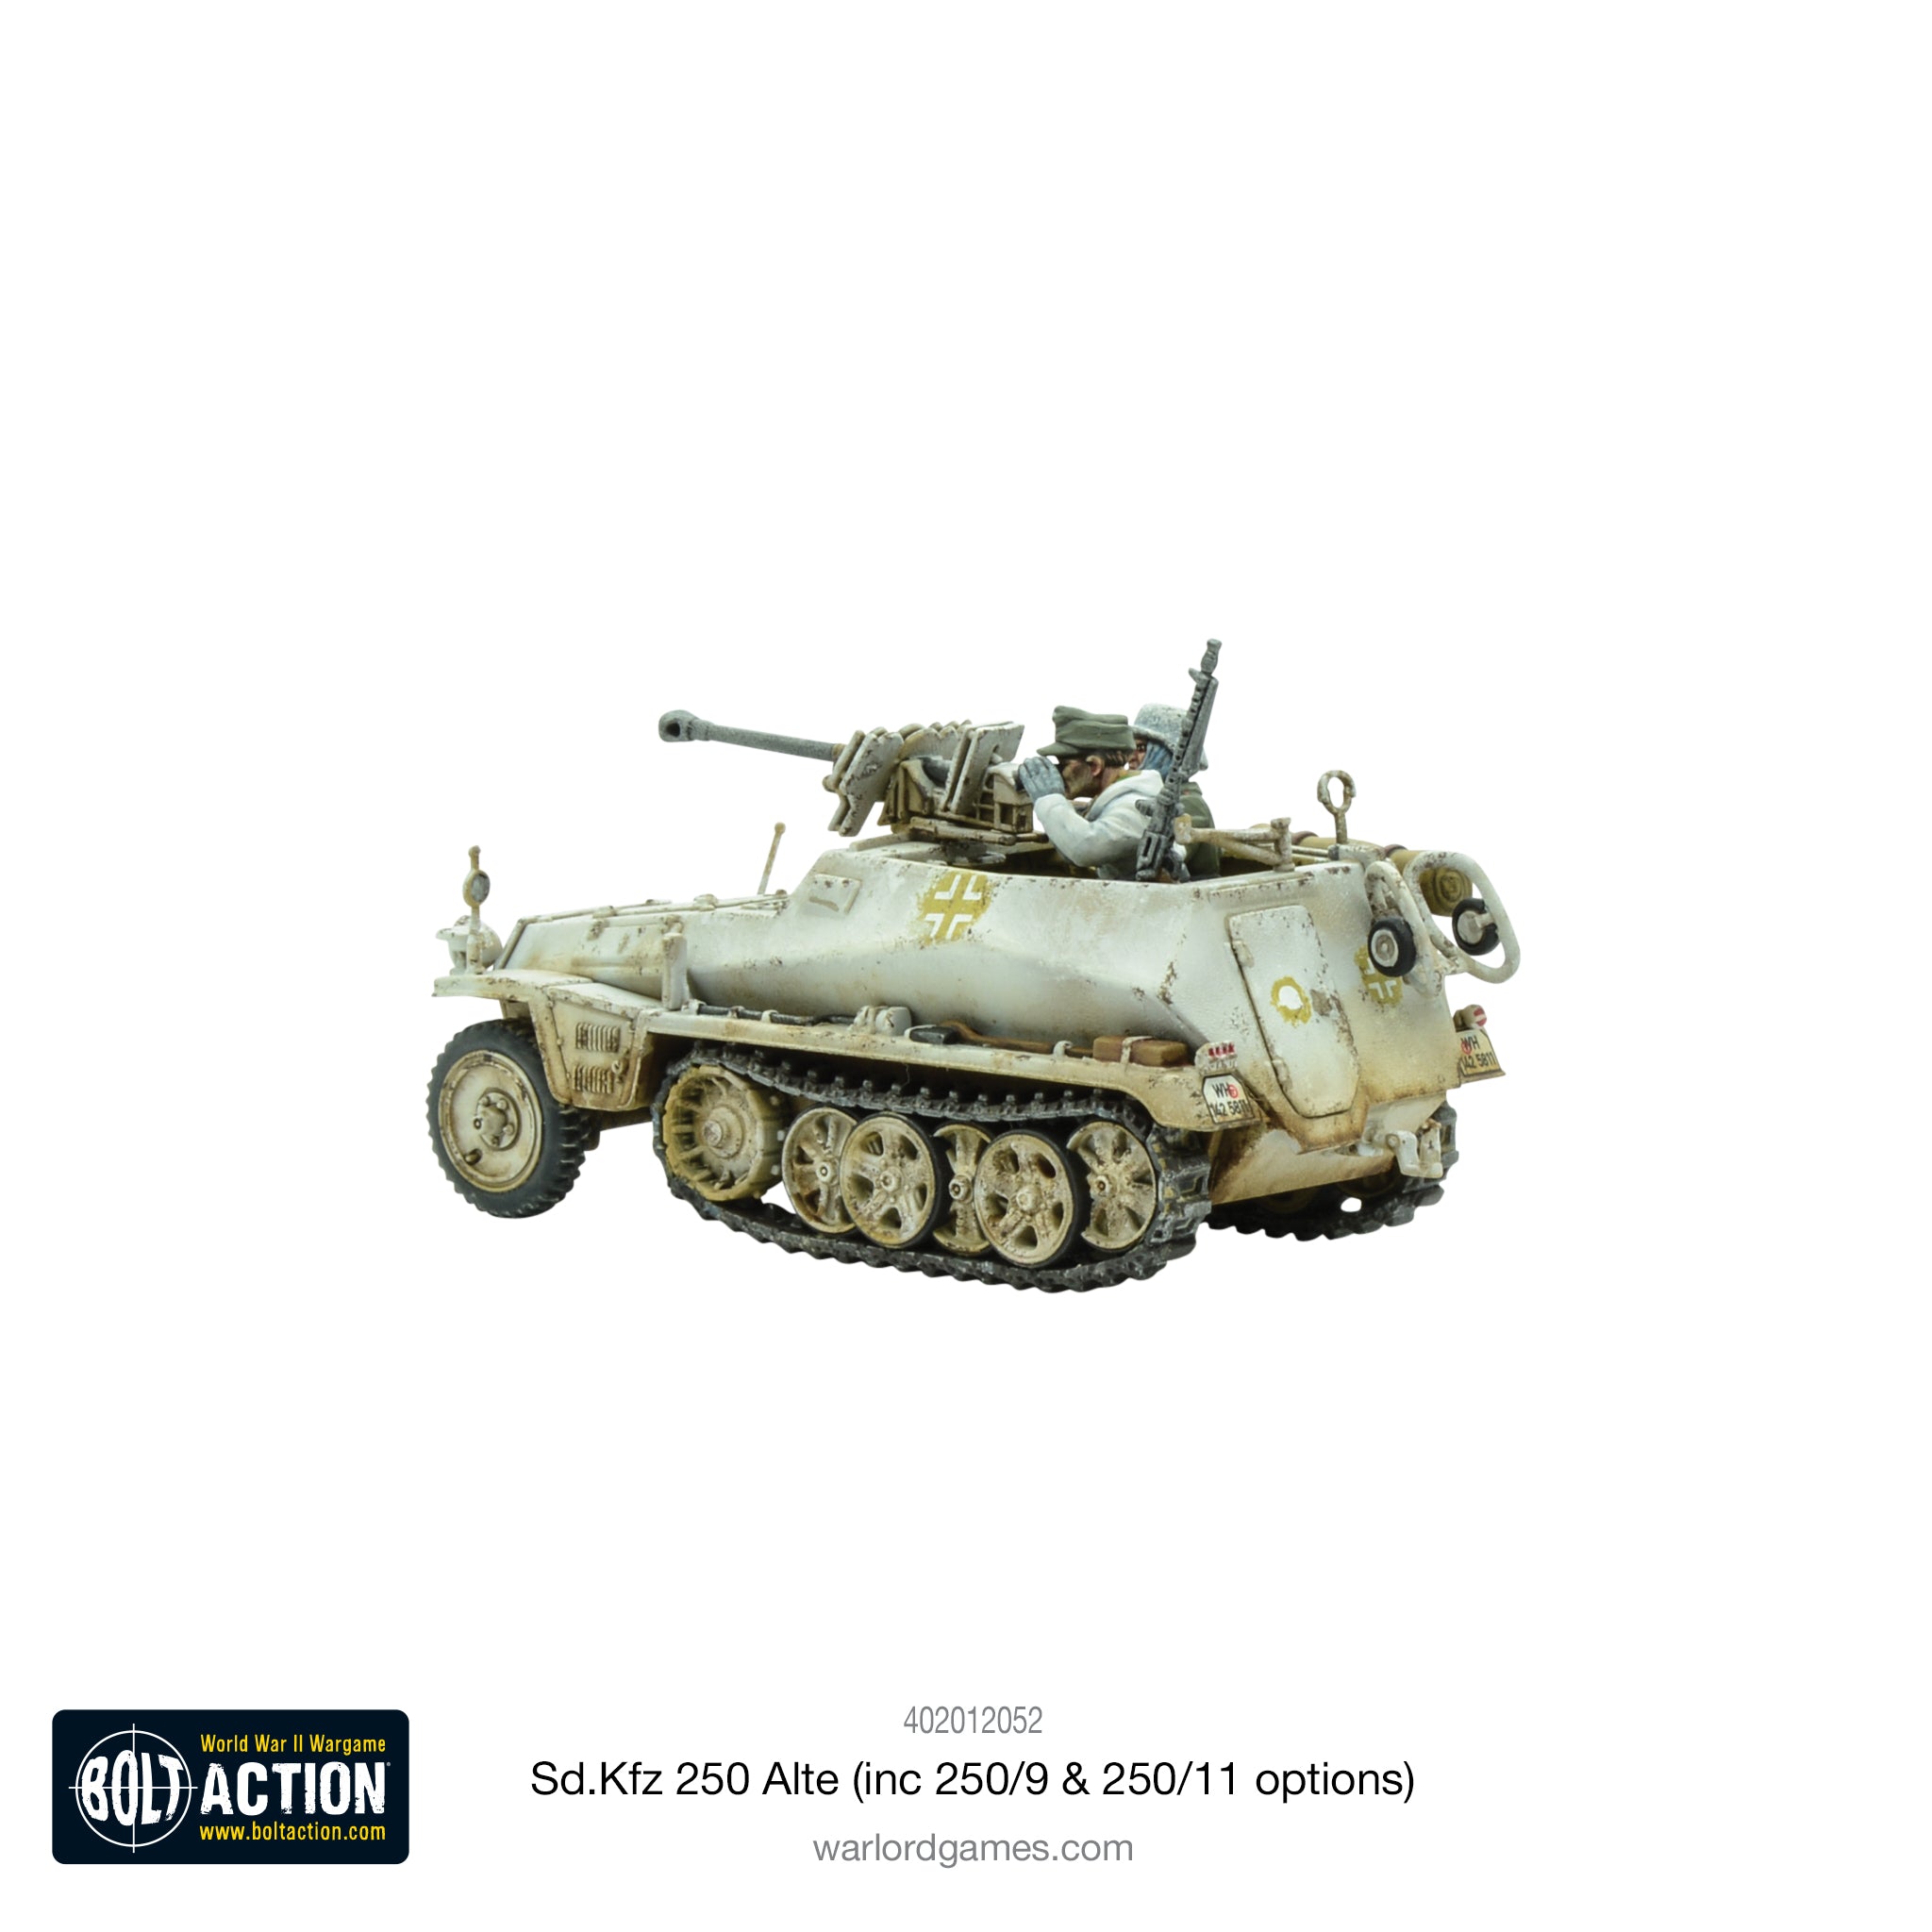 Sd.Kfz 250 (Alte) Half-Track (Options For 250/1, 250/9 & 250/11 Variants)